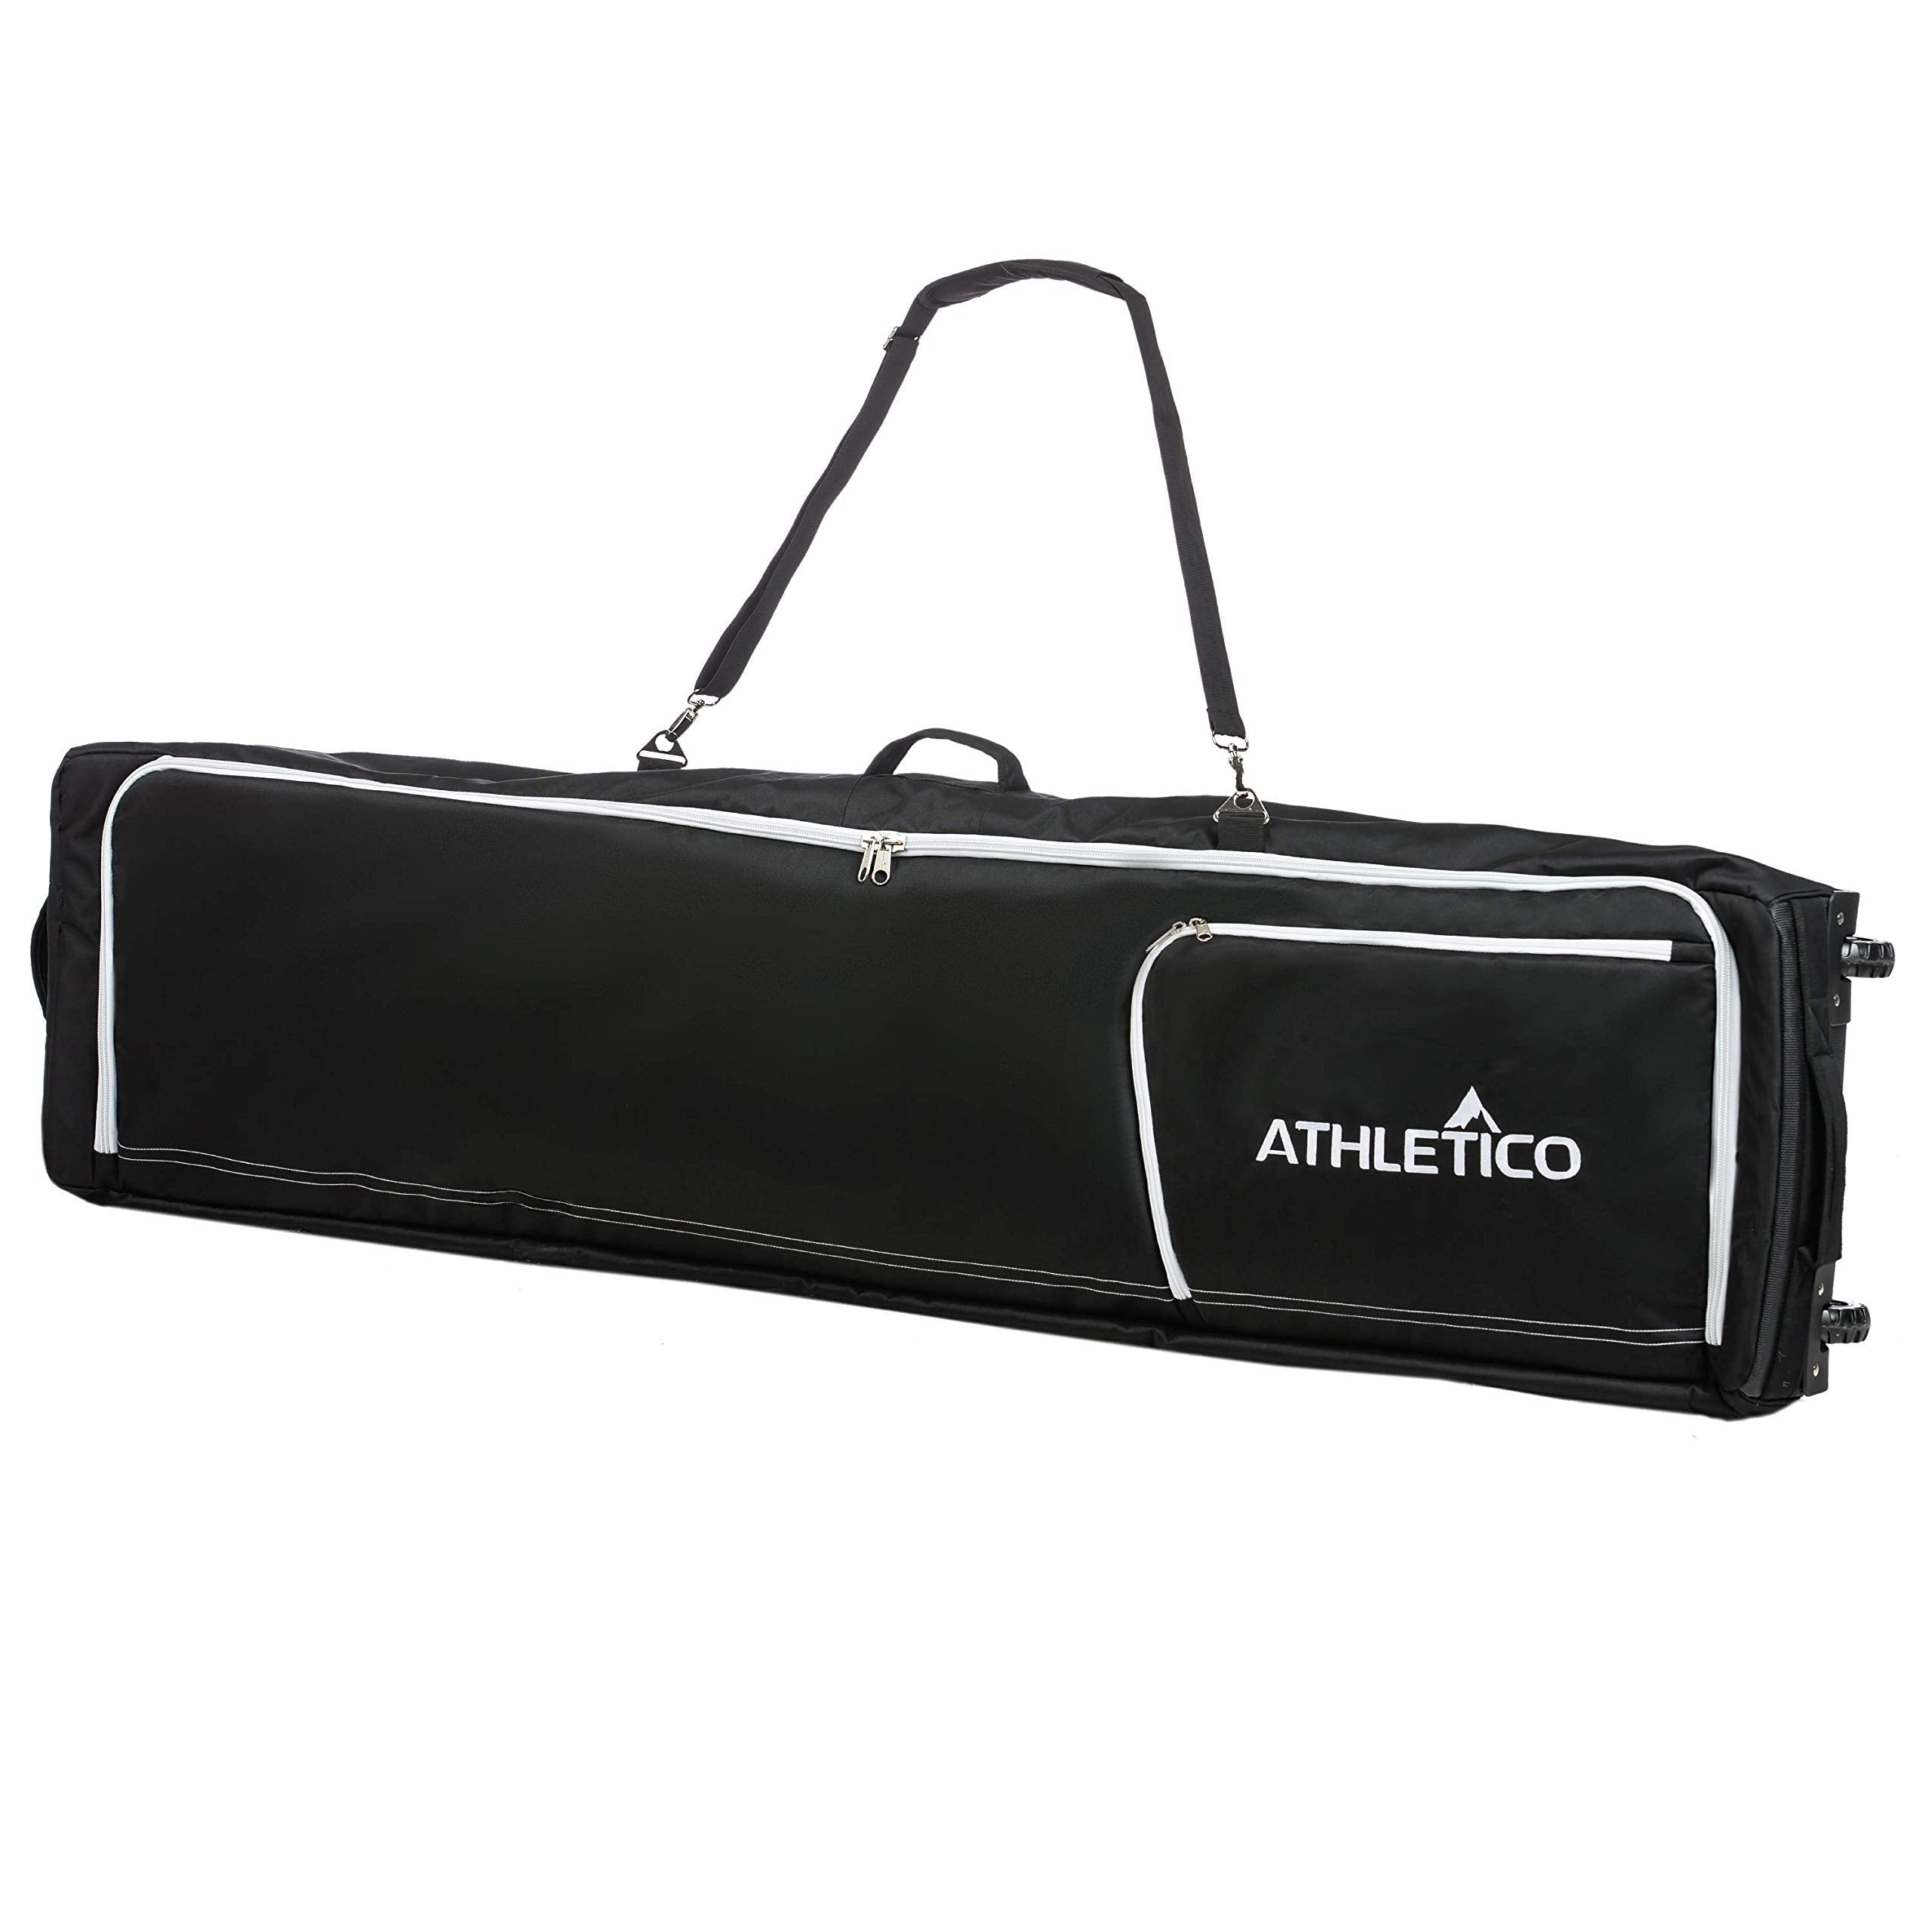 Athletico Conquest Padded Snowboard Bag With Wheels - Travel Bag for Single Snowboard and Snowboard Boots (Black, 157 cm)  - Like New